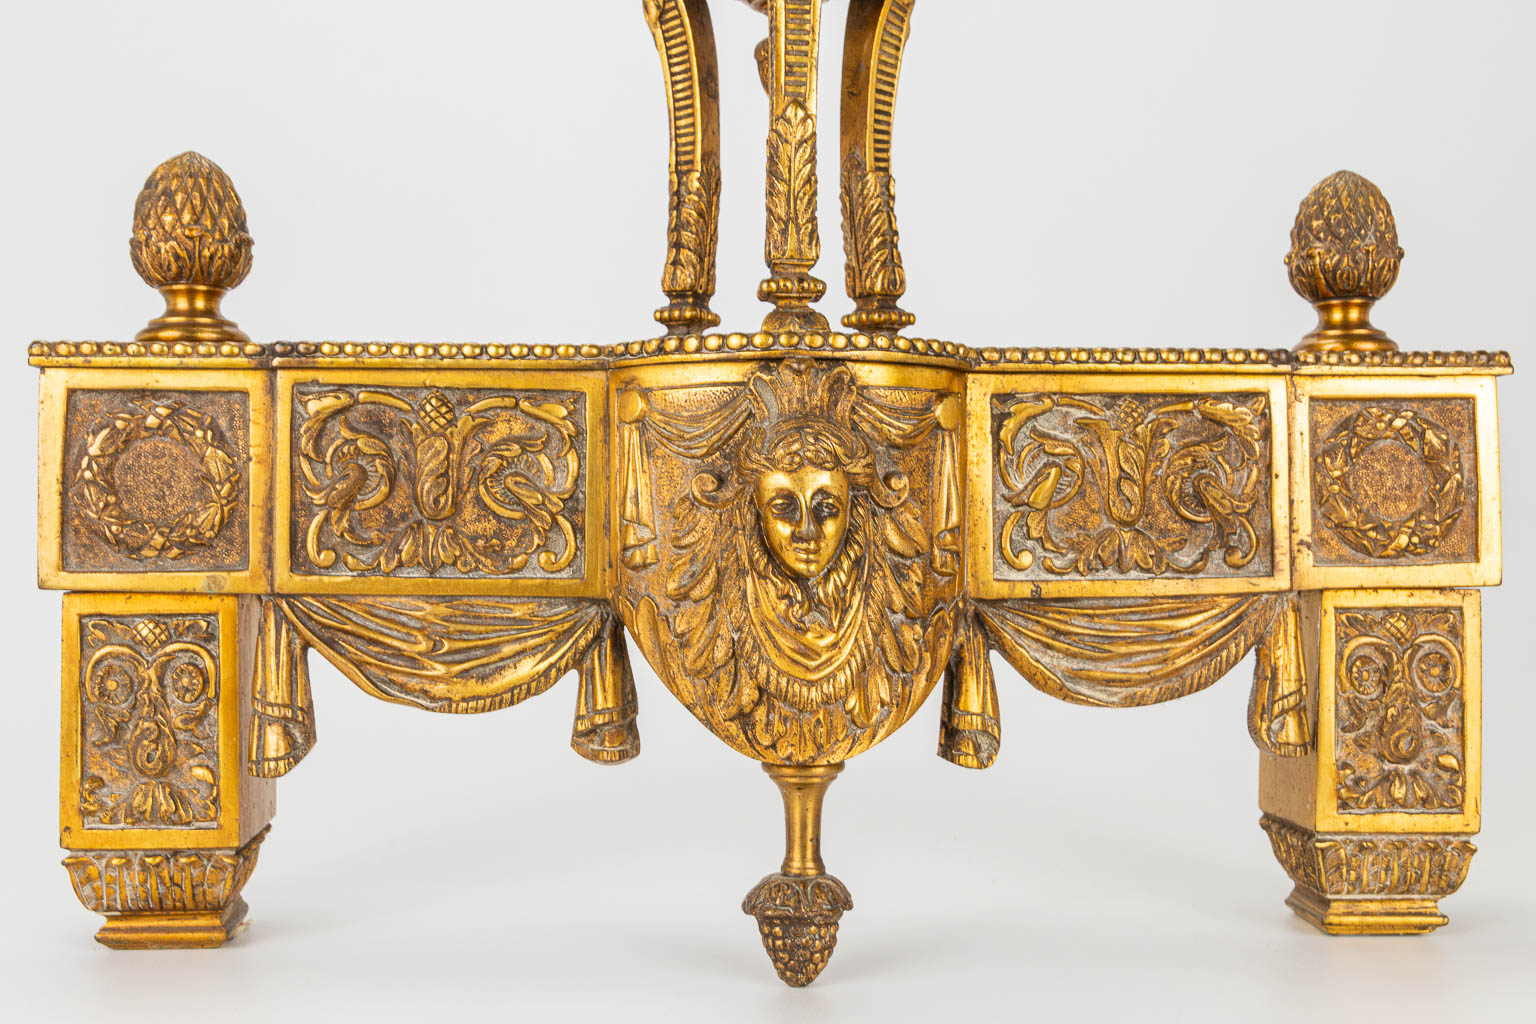 A pair of fireplace andirons made of bronze in Louis XVI style.